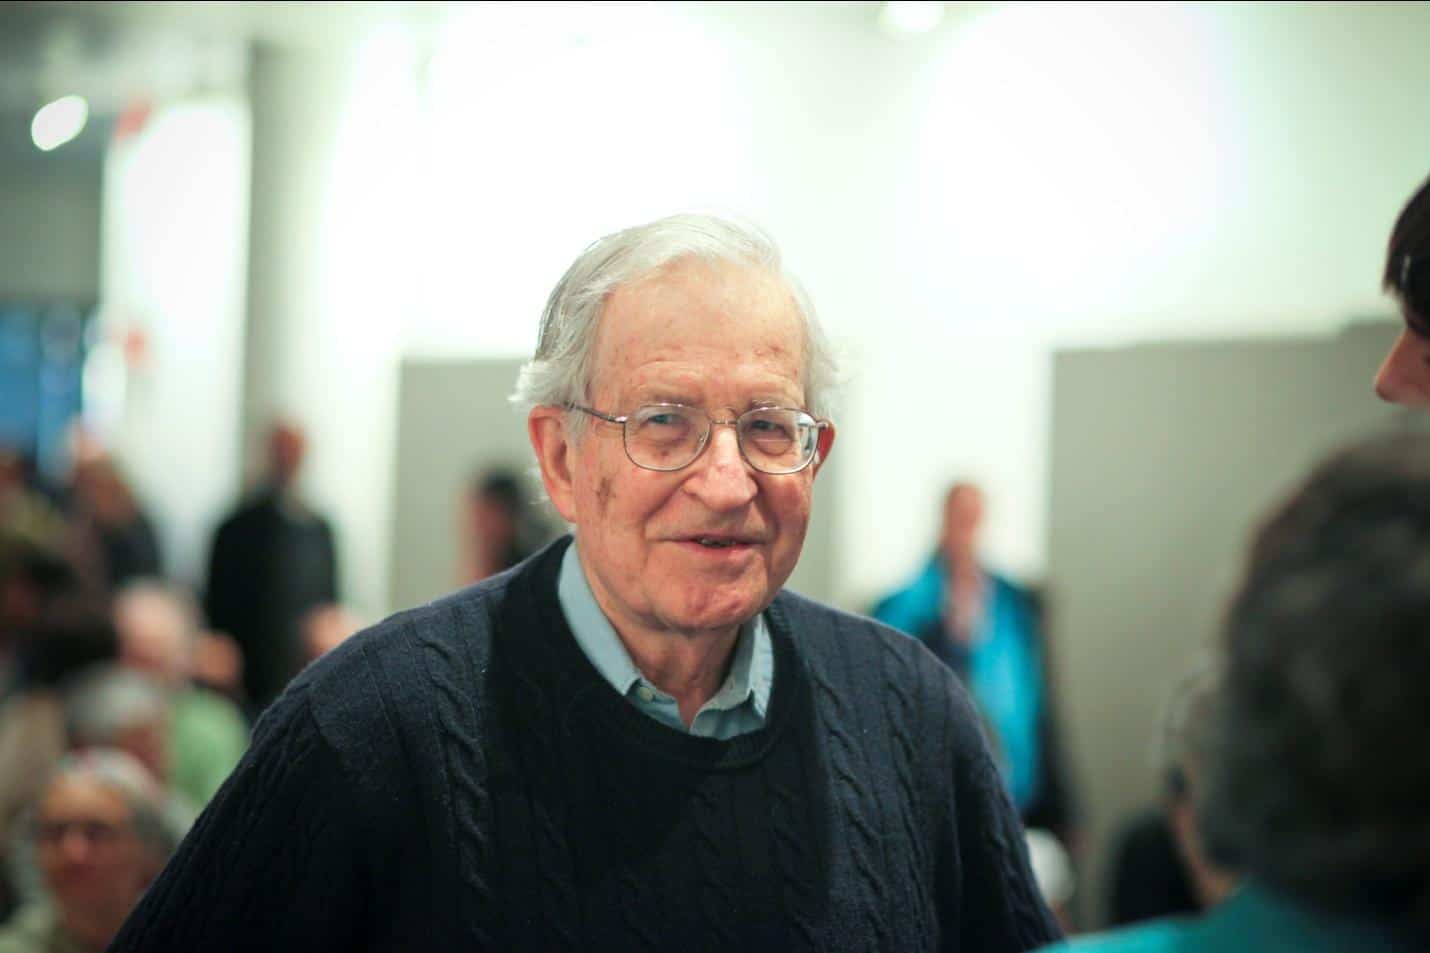 Noam Chomsky looking at the camera